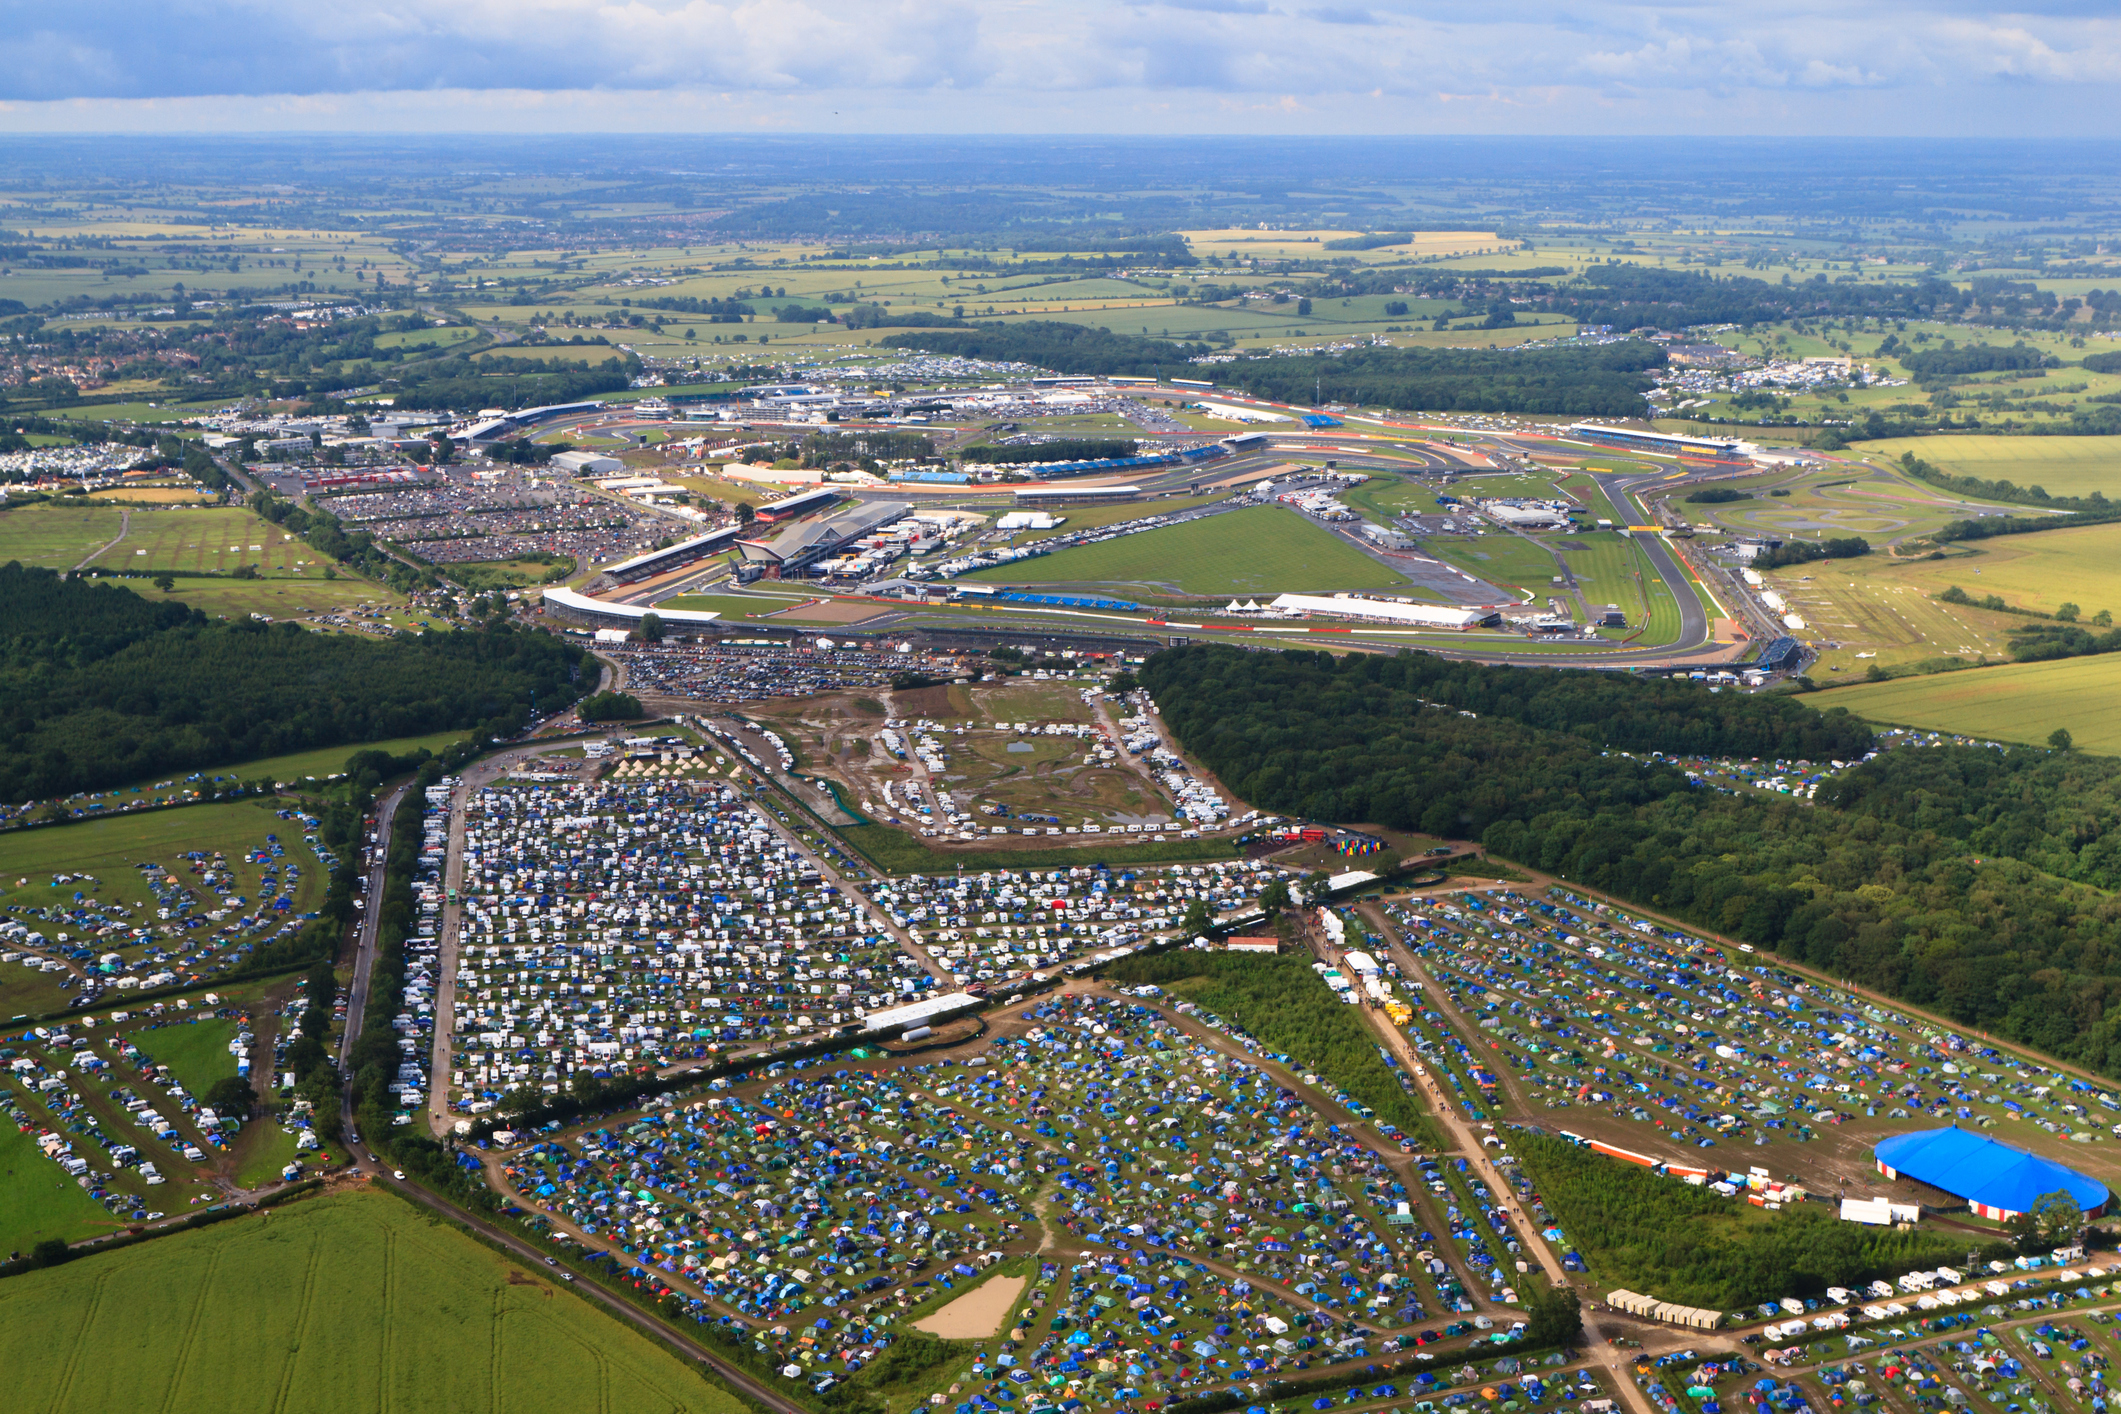 Successful in-field trial of oneTRANSPORT smart city initiative at Silverstone Circuit